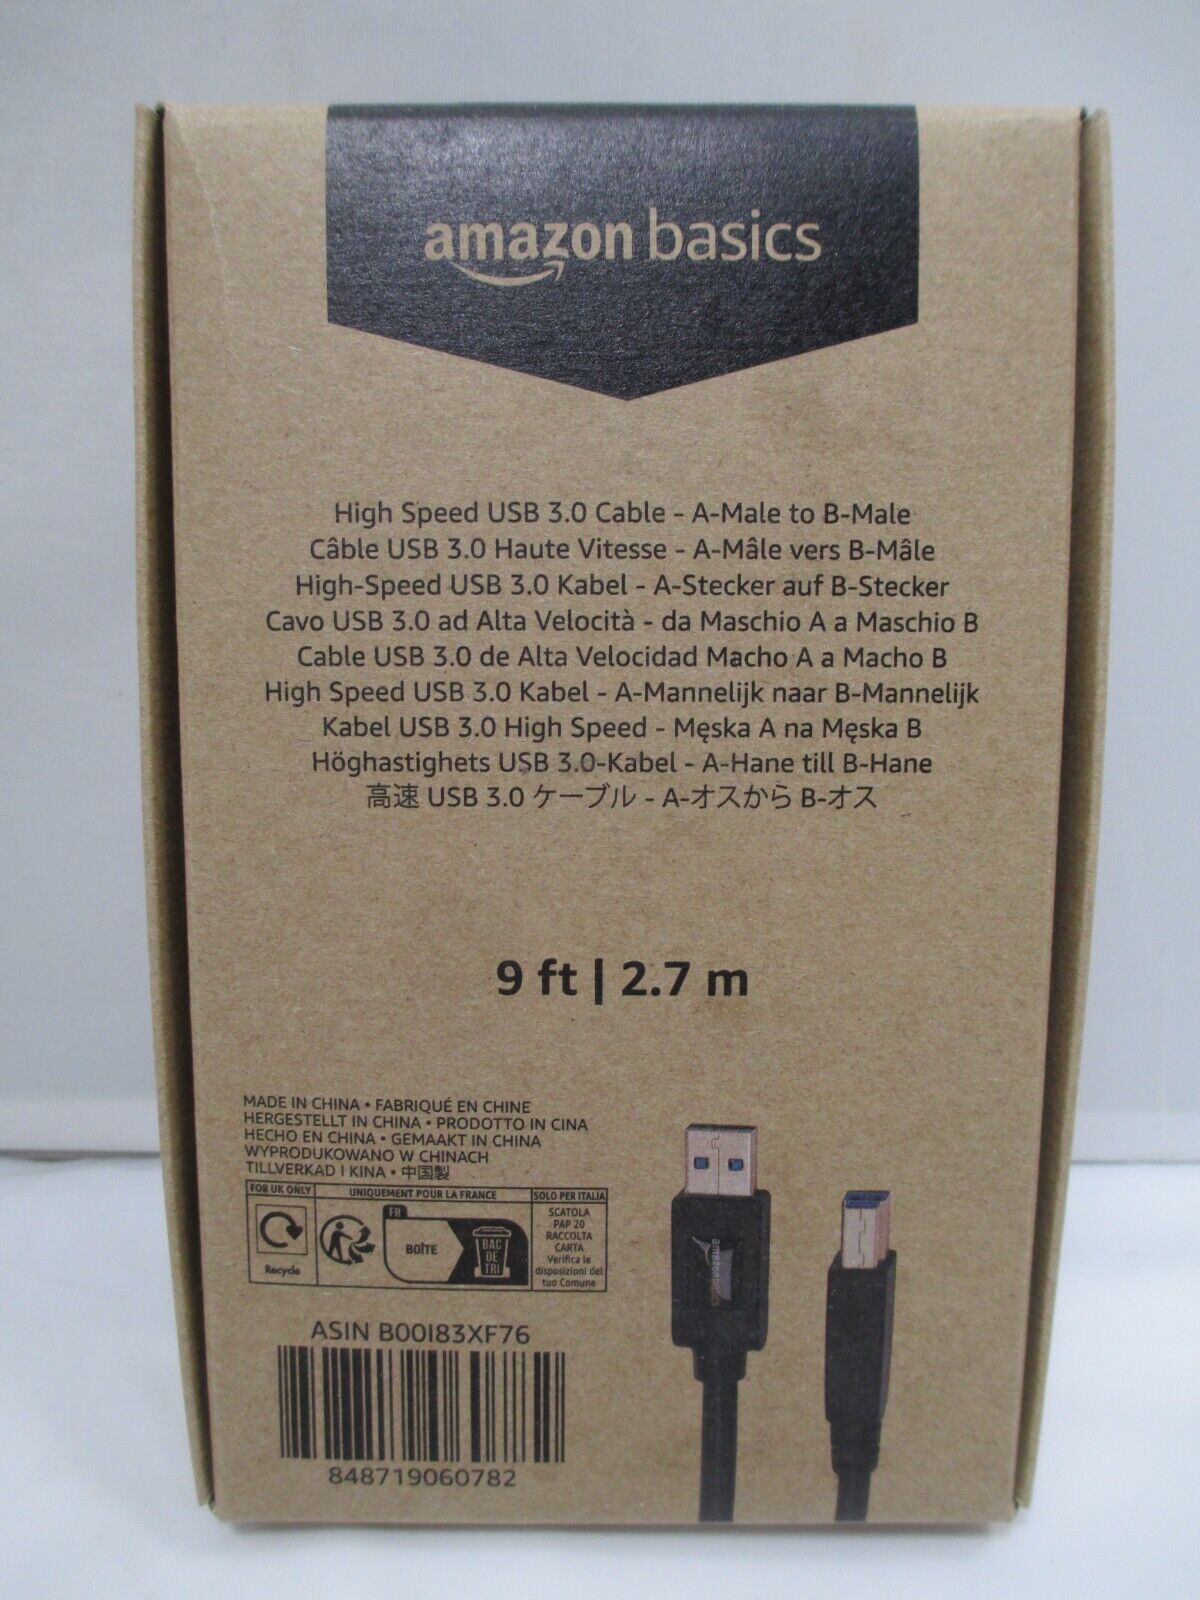 Amazon Basics High Speed USB 3.0 Cable 9ft A Male To B Male